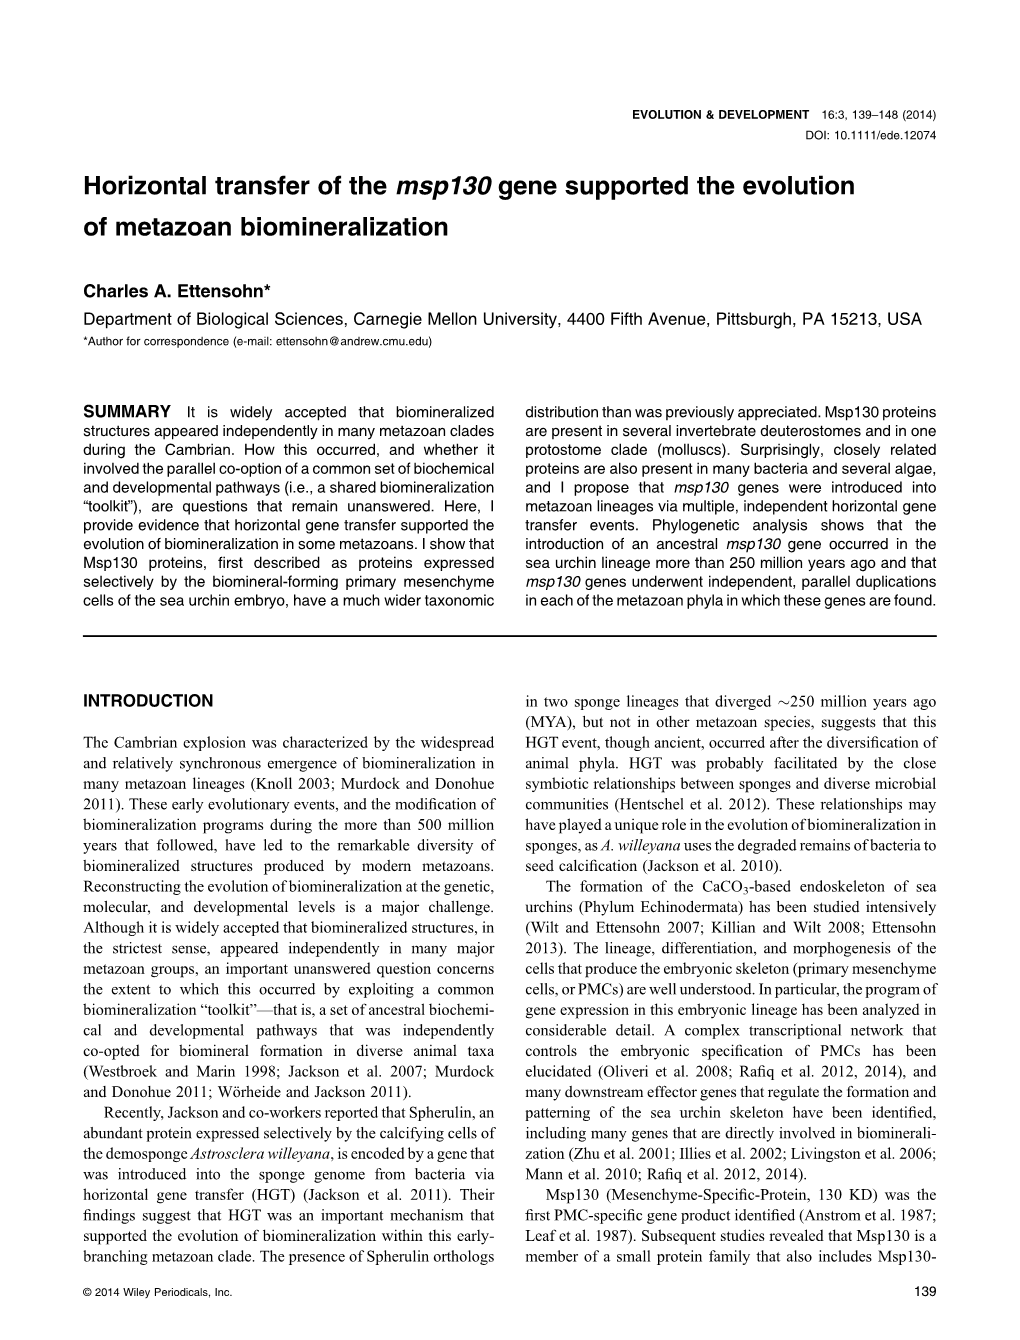 Horizontal Transfer of the Msp130 Gene Supported the Evolution of Metazoan Biomineralization